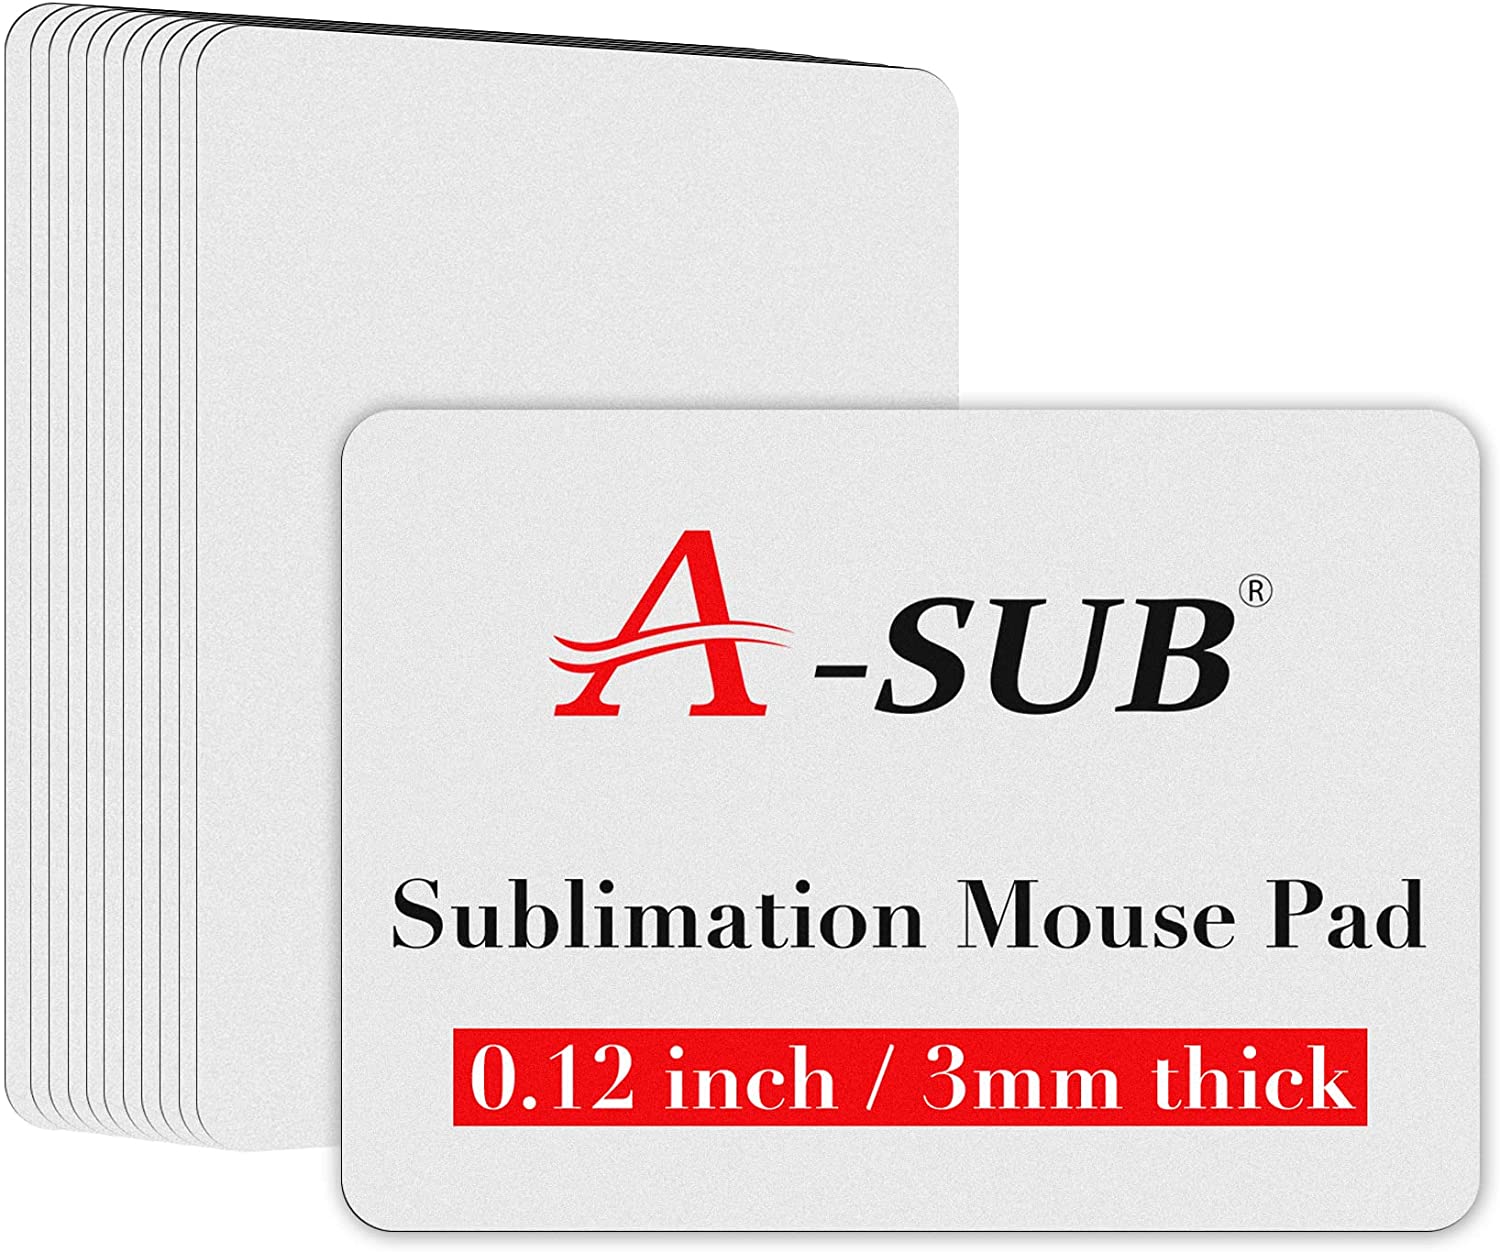 A-SUB Sublimation Mouse Pad Blank Rectangular Blanks 3mm Thick for Tra